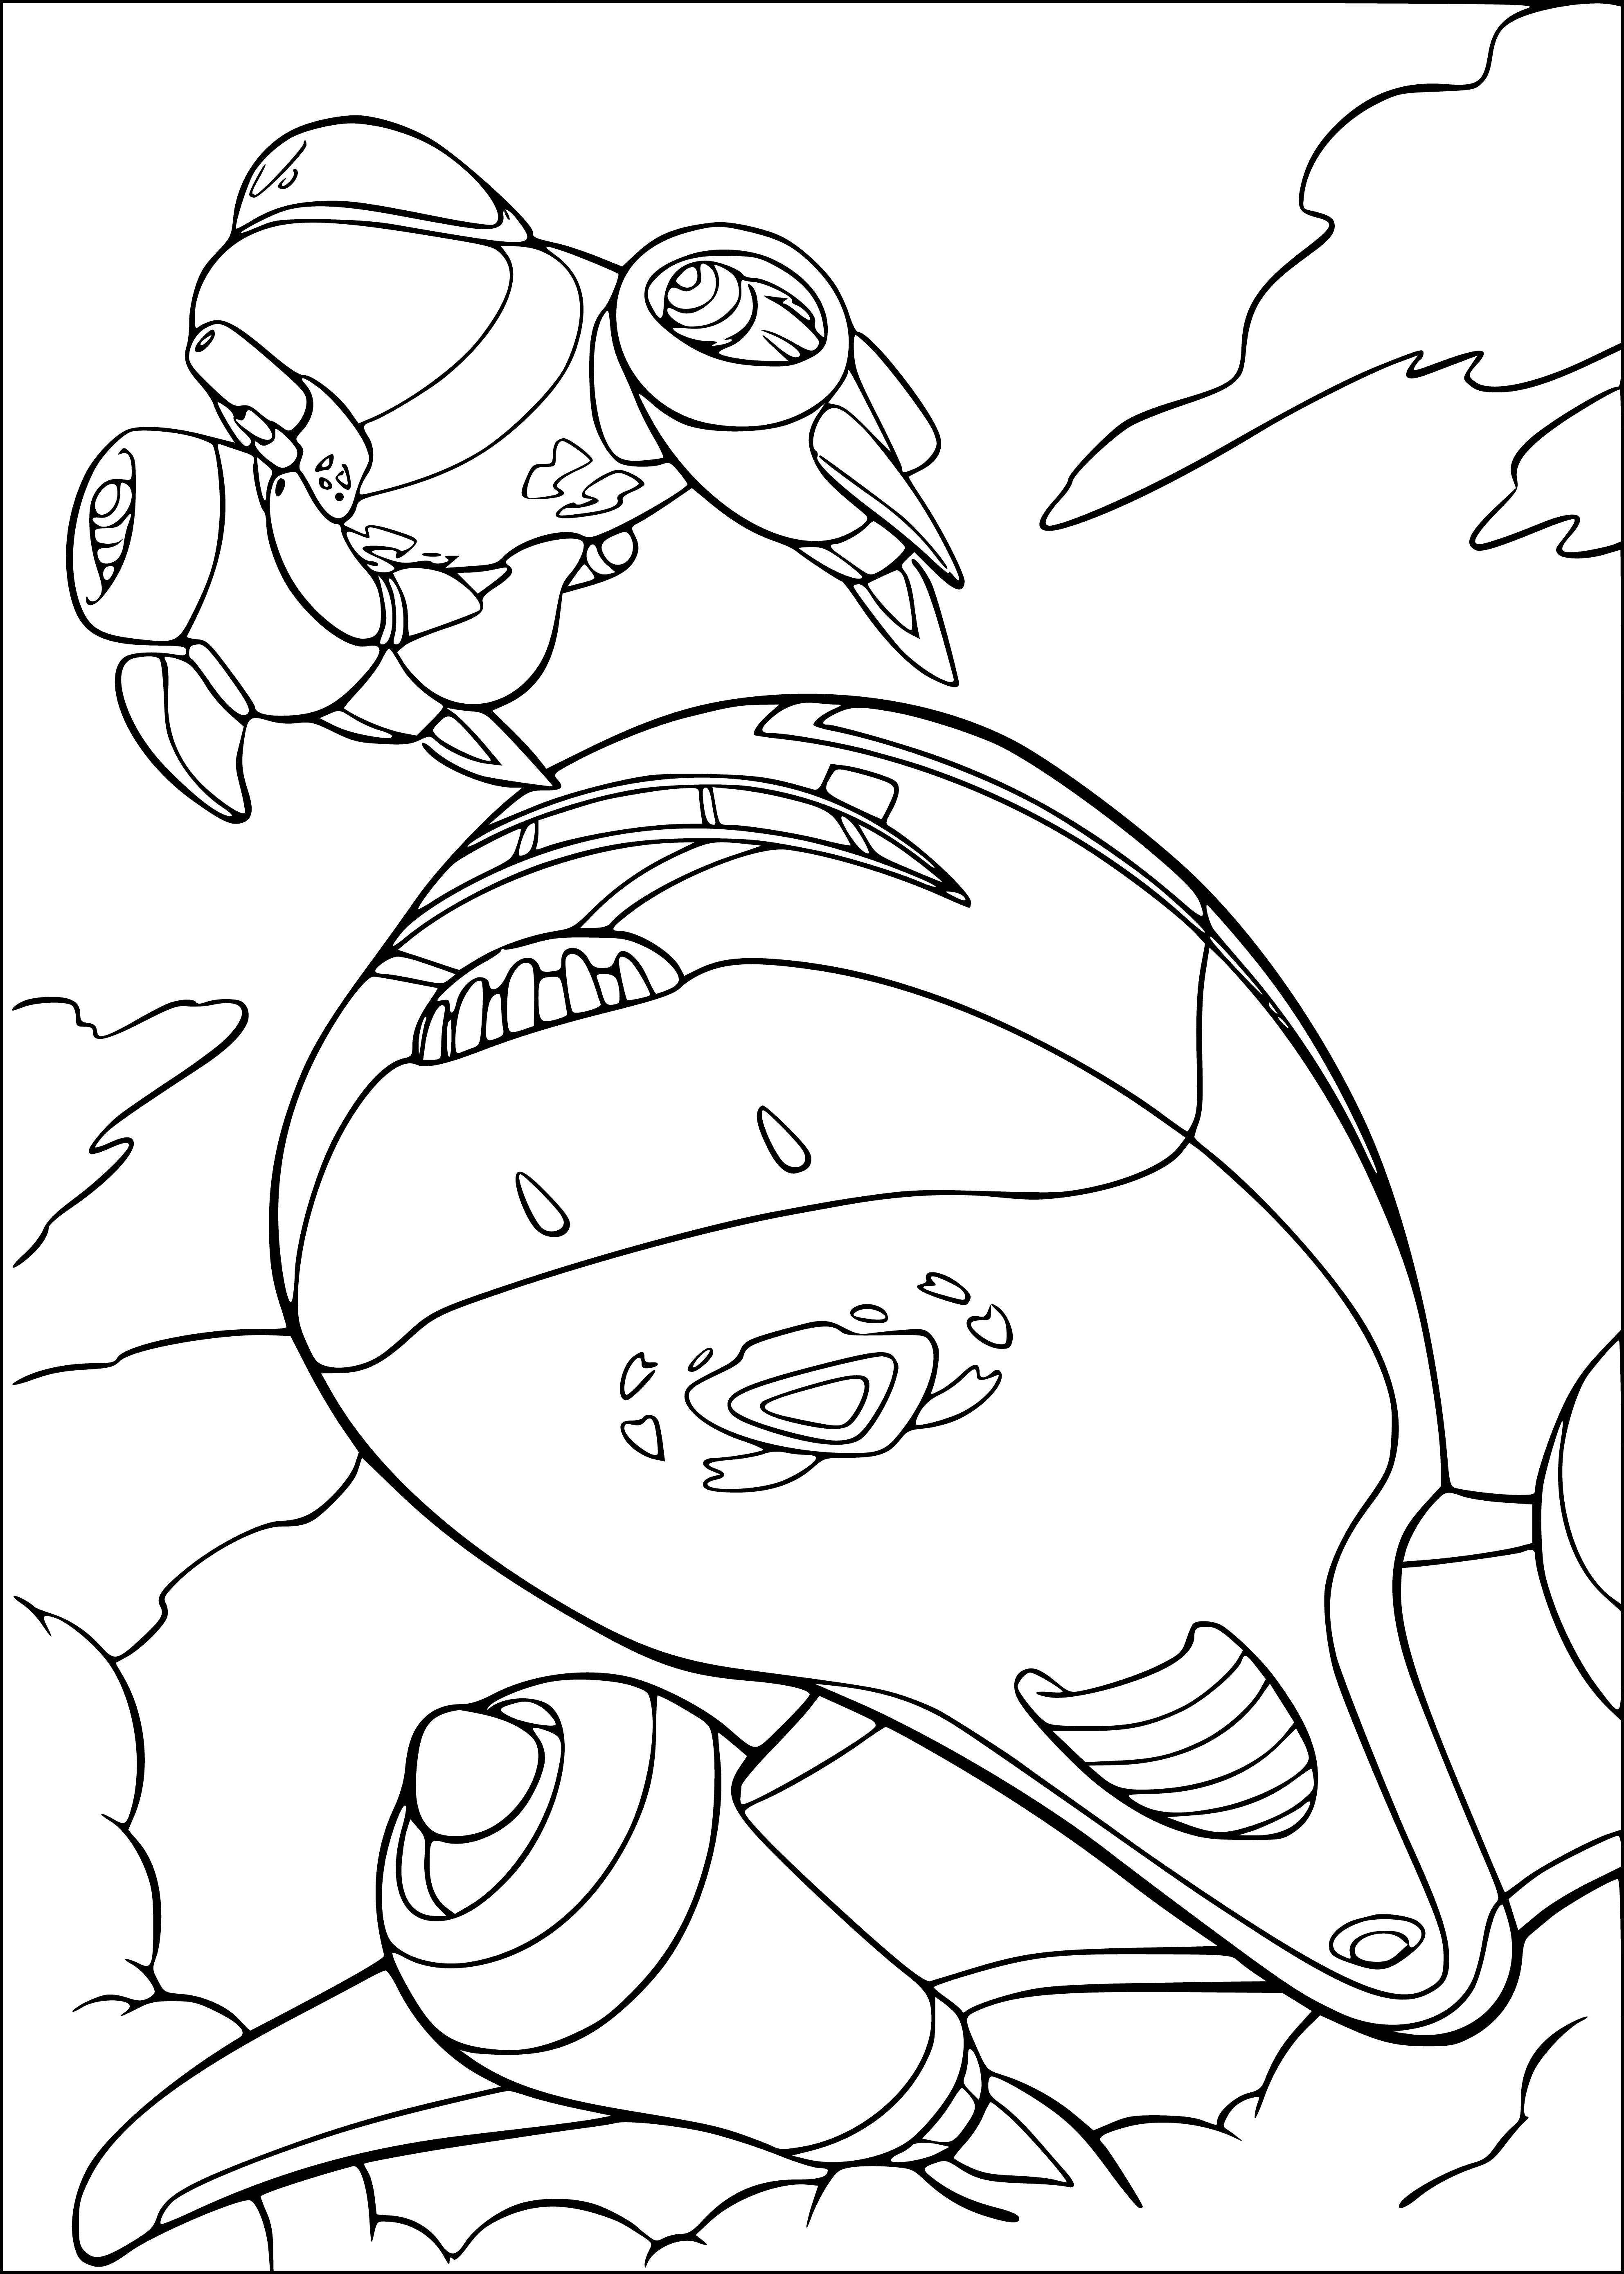 coloring page: Two spacecrafts of different sizes & colors in the center of a coloring page, with small objects in the background. #spacecrafts #coloring